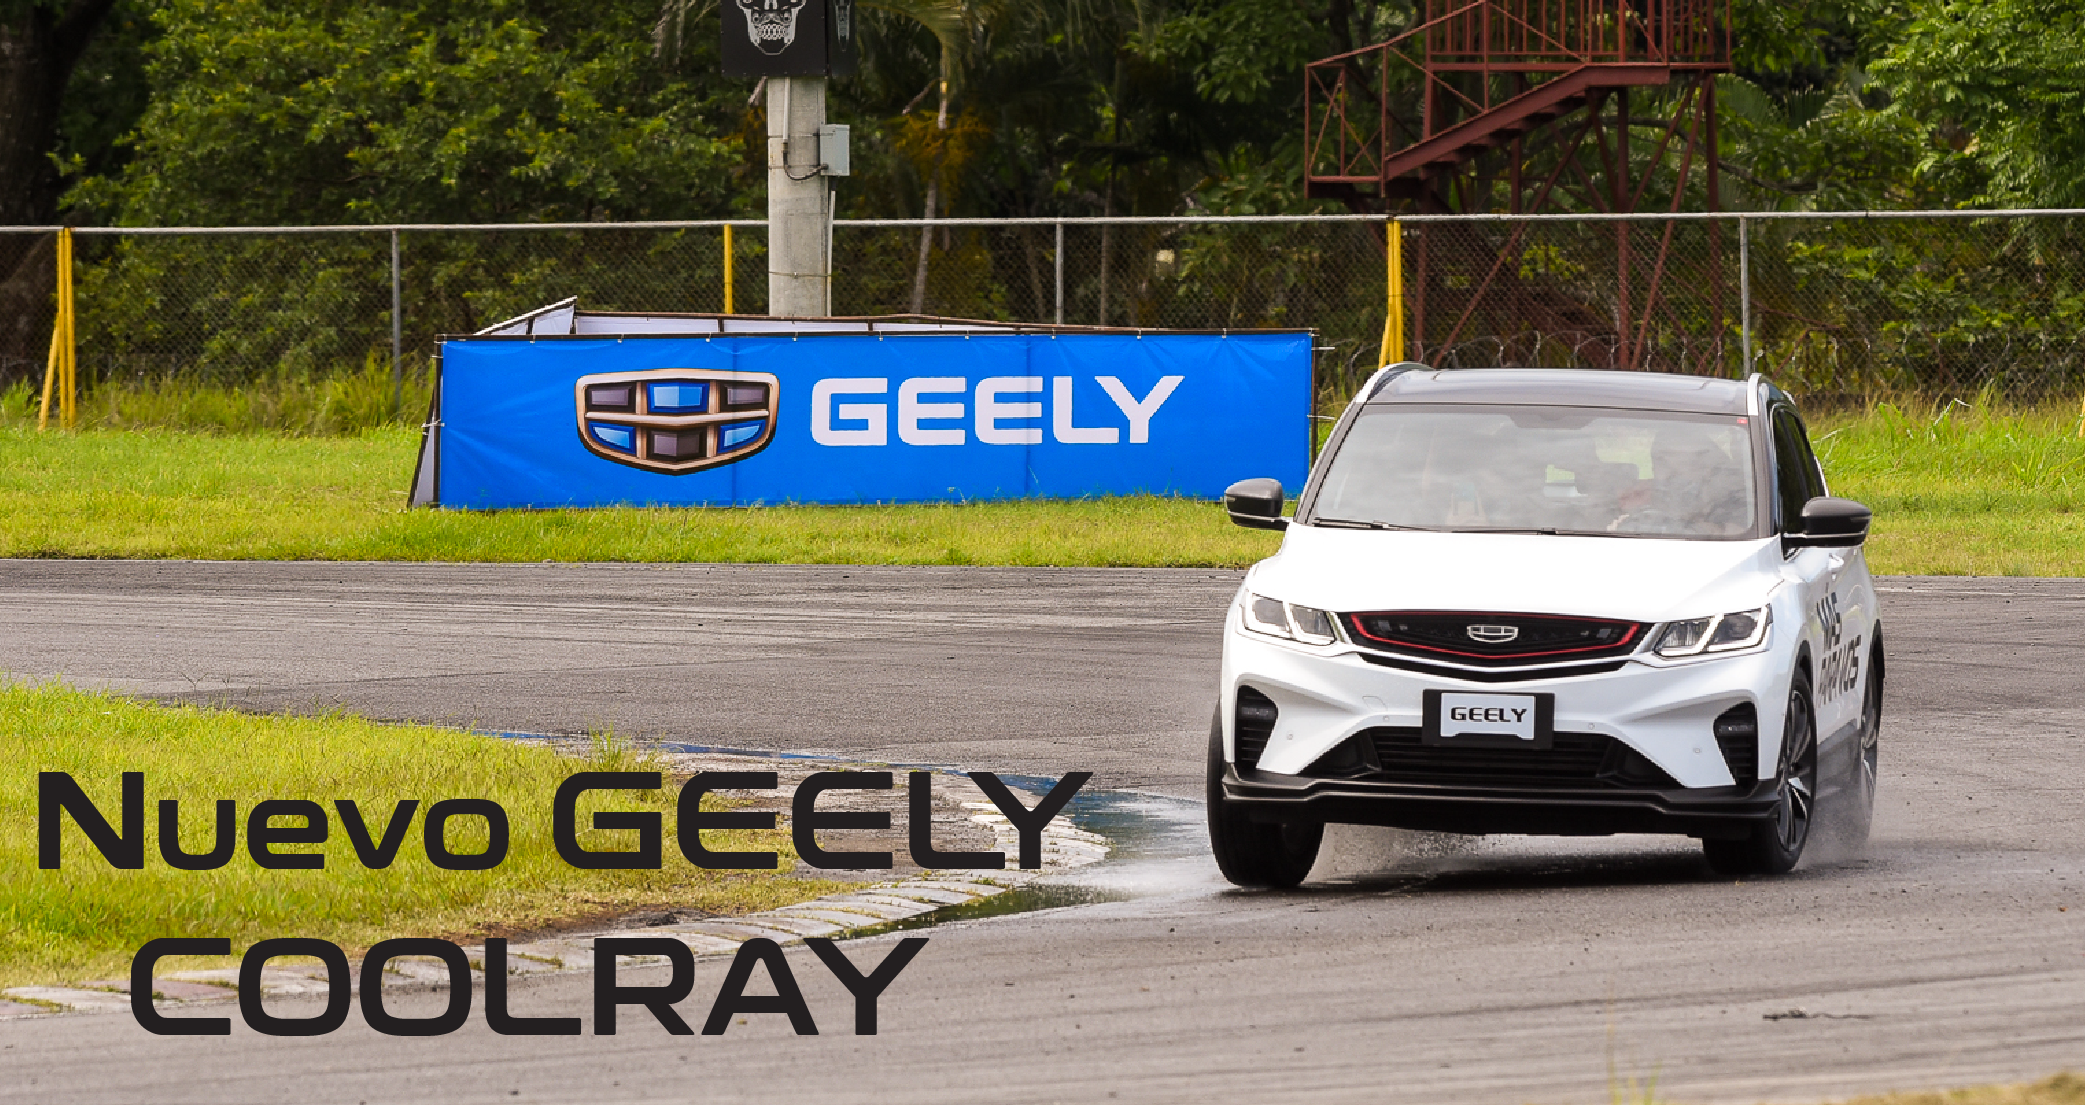 Geely Cool Ray Costa Rica